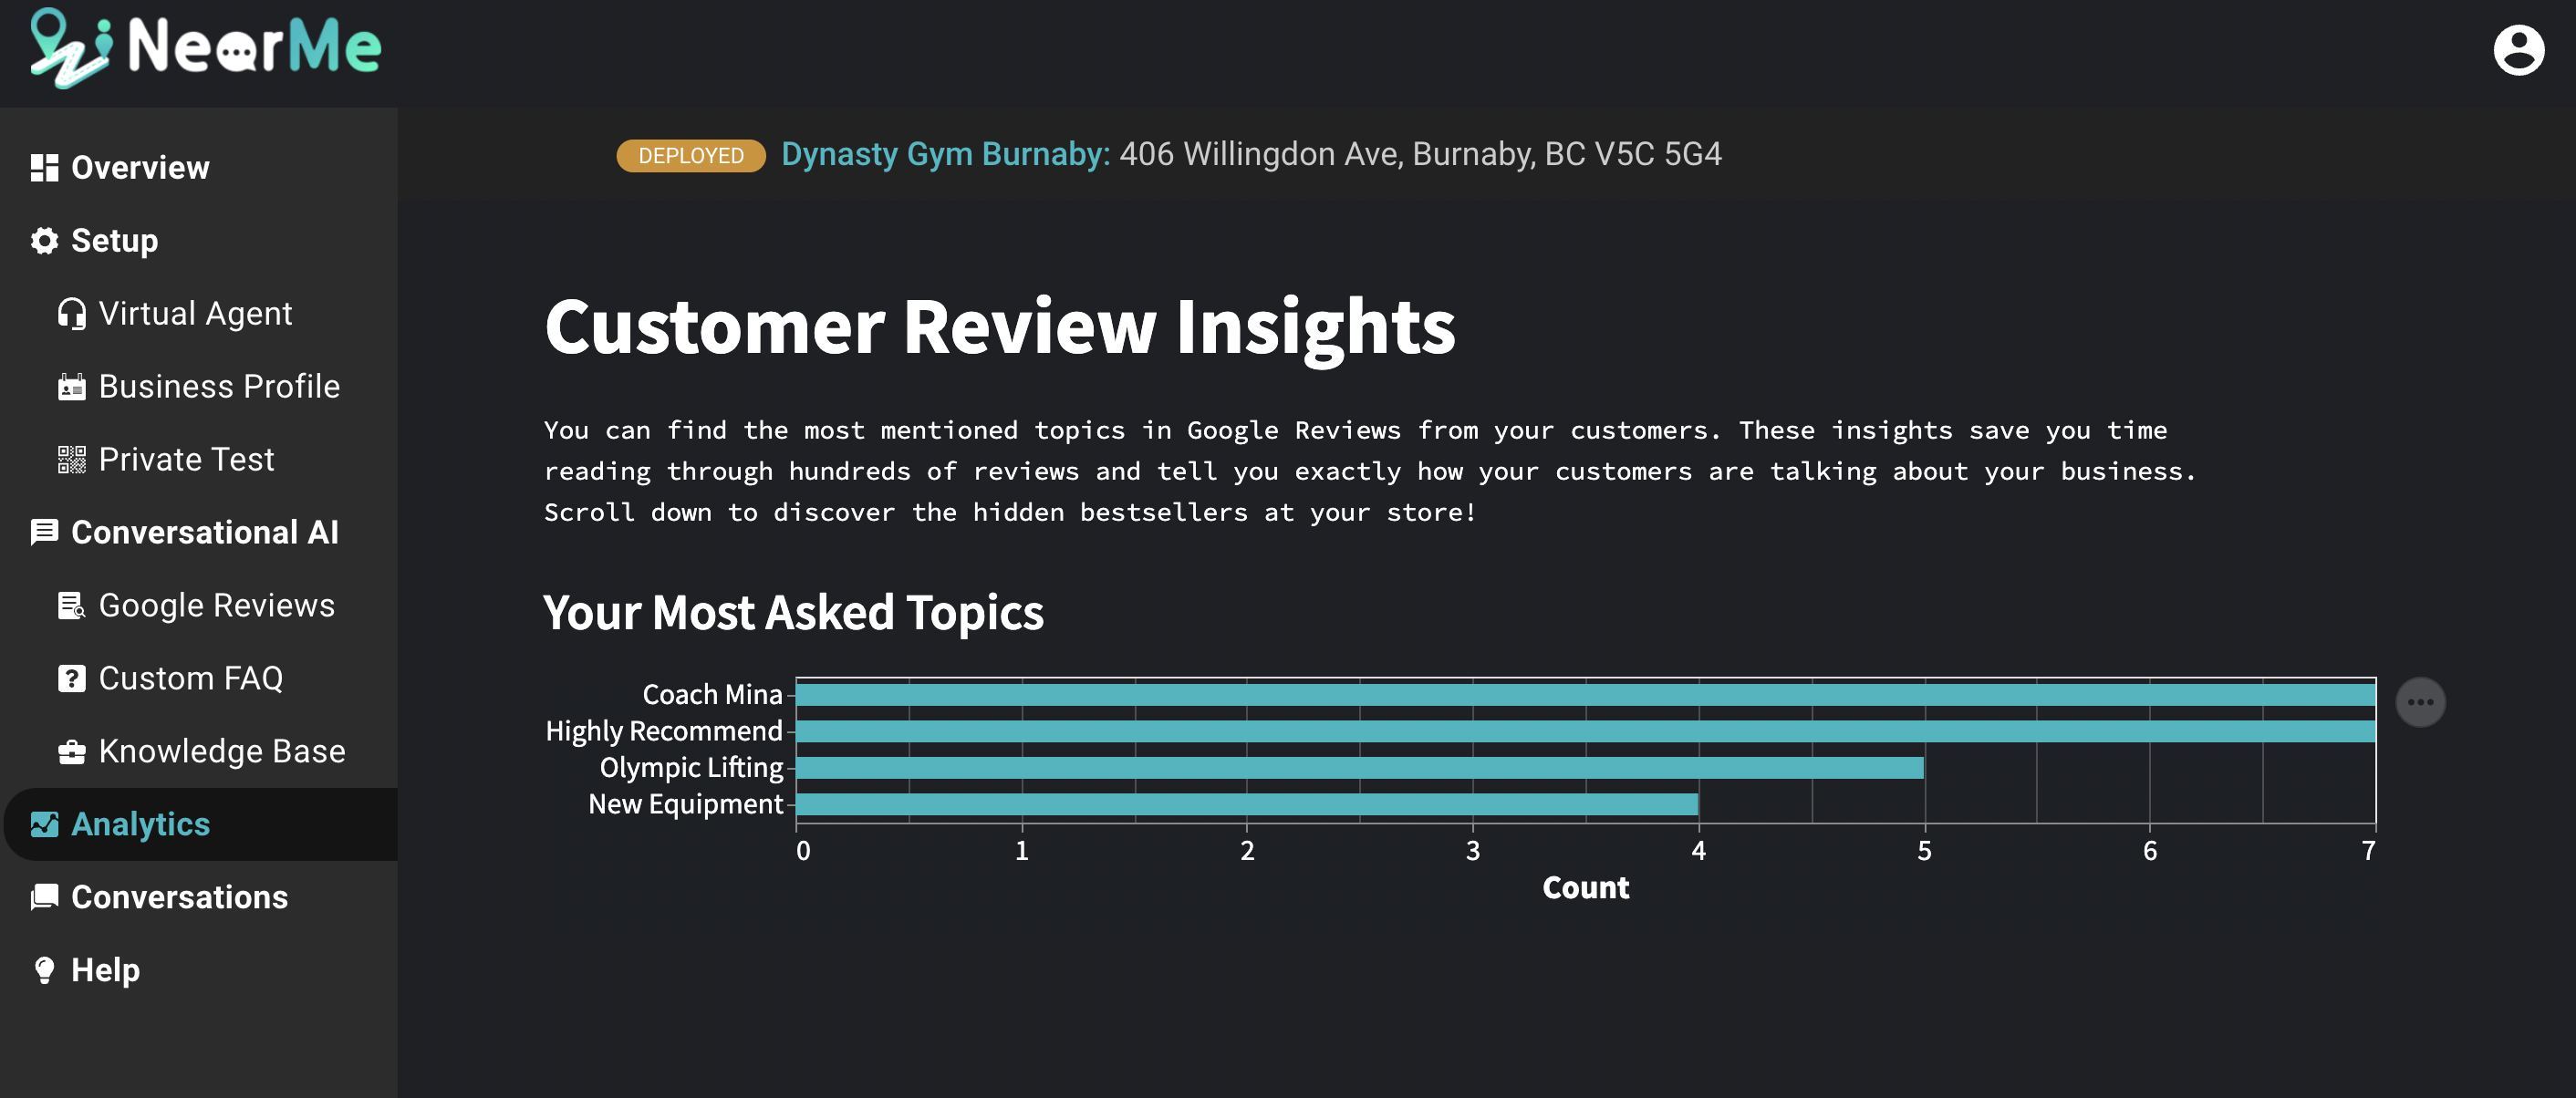 Near Me Analytics allows you to find the most mentioned topics in Google Reviews.